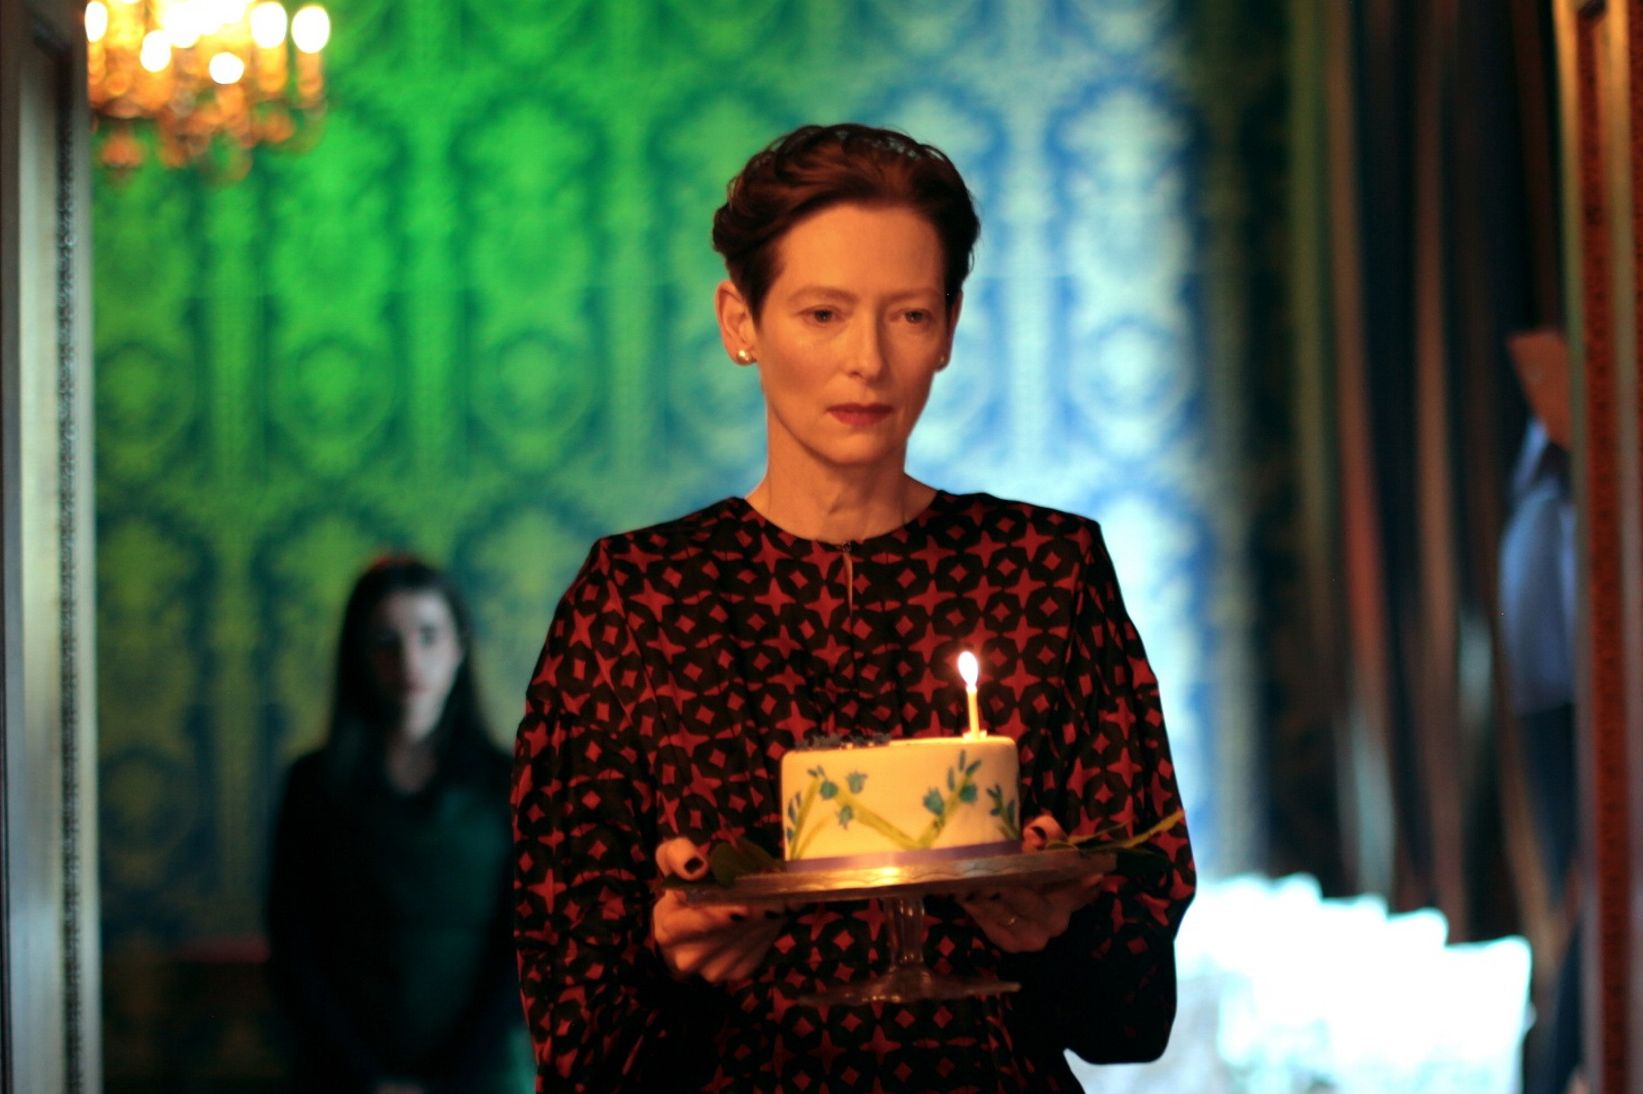 The Eternal Daughter review: Tilda Swinton see double in this eerie family tale